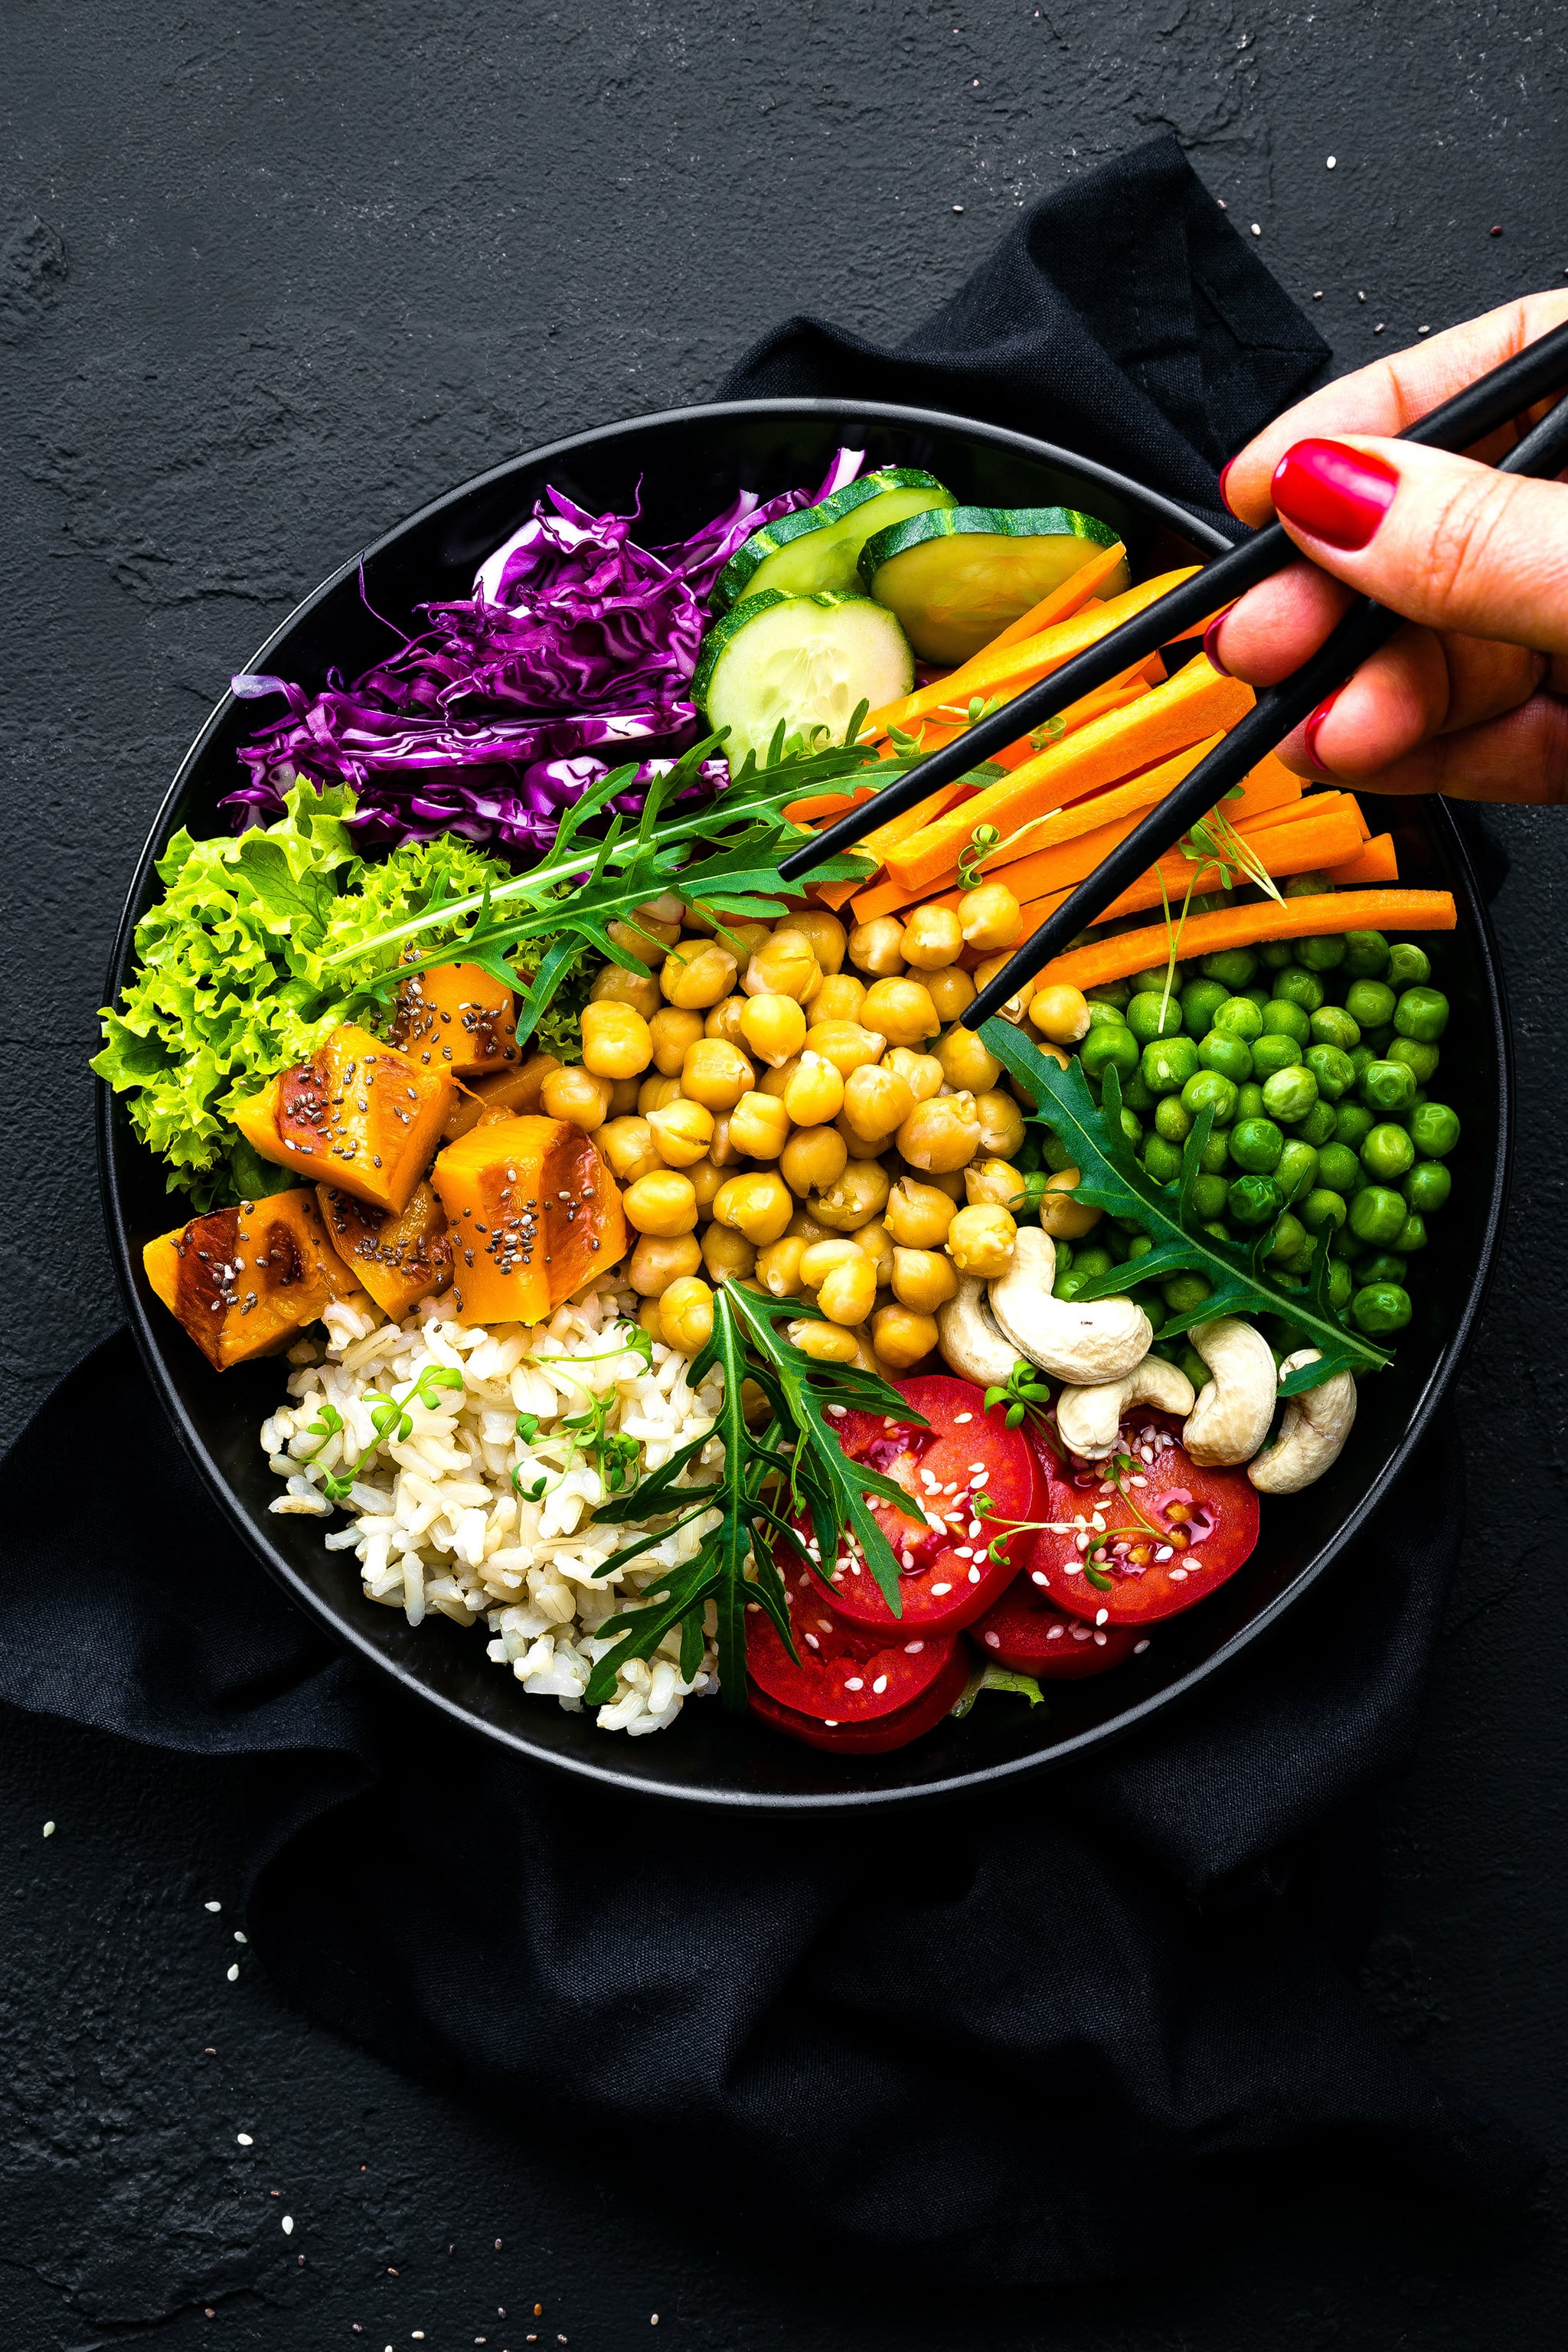 Is a Vegan Diet Effective for Weight Loss?